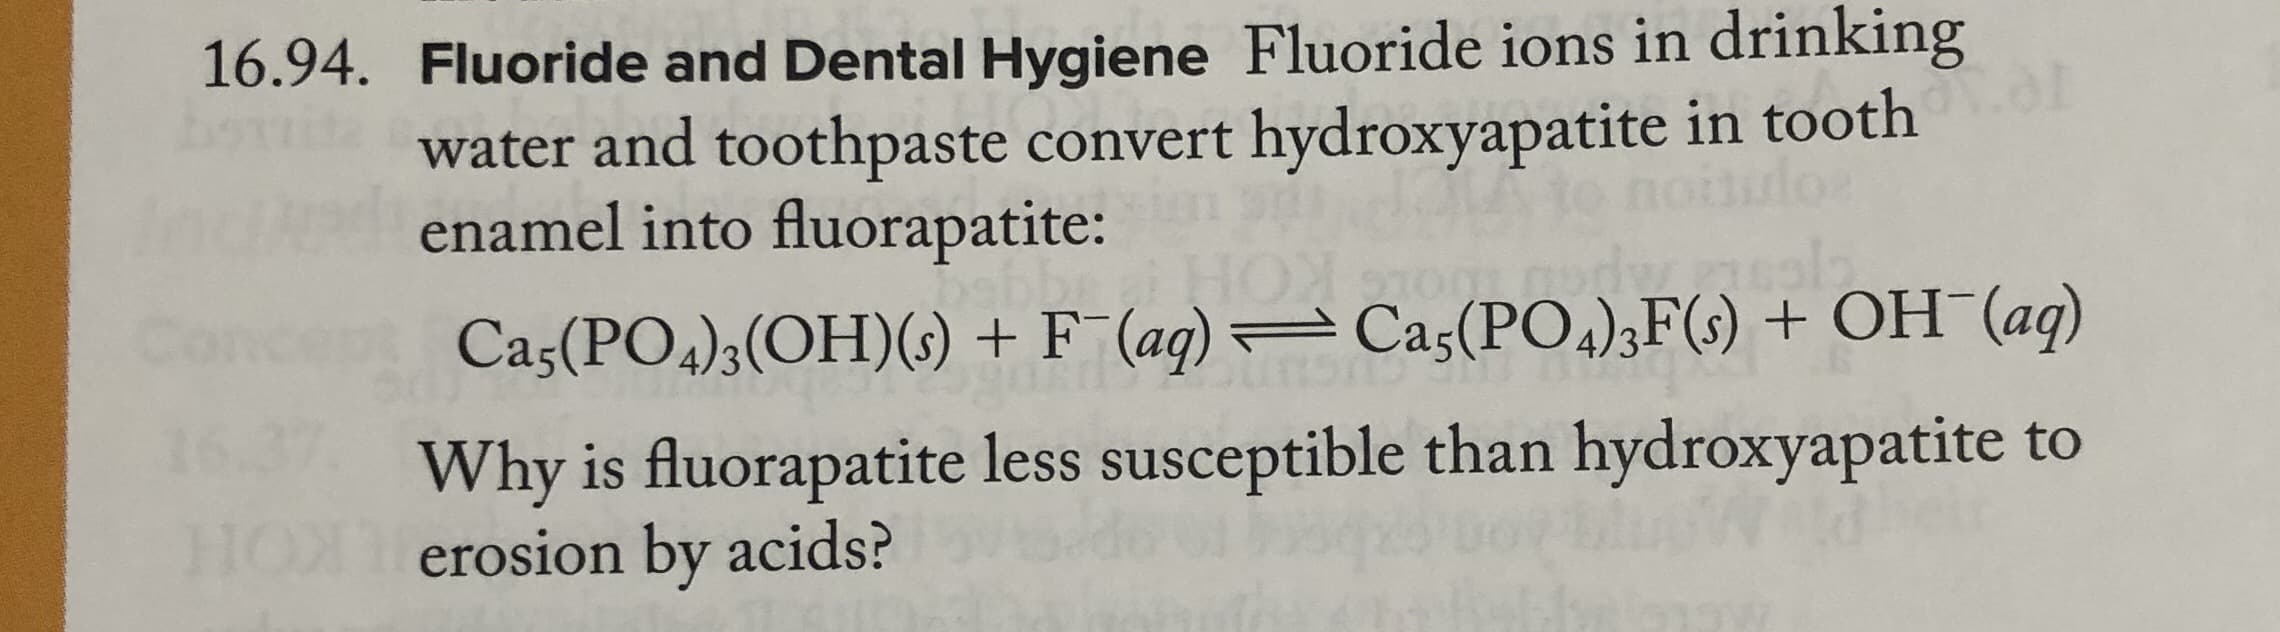 16.94. Fluoride and Dental Hygiene Fluoride ions in drinking
bortita
water and toothpaste convert hydroxyapatite in tooth
enamel into fluorapatite:
Concept Cas(PO,);(OH)(s) + F¯ (ag) = Cas(PO,);F(s) + OH (aq)
Why is fluorapatite less susceptible than hydroxyapatite to
HONerosion by acids?
